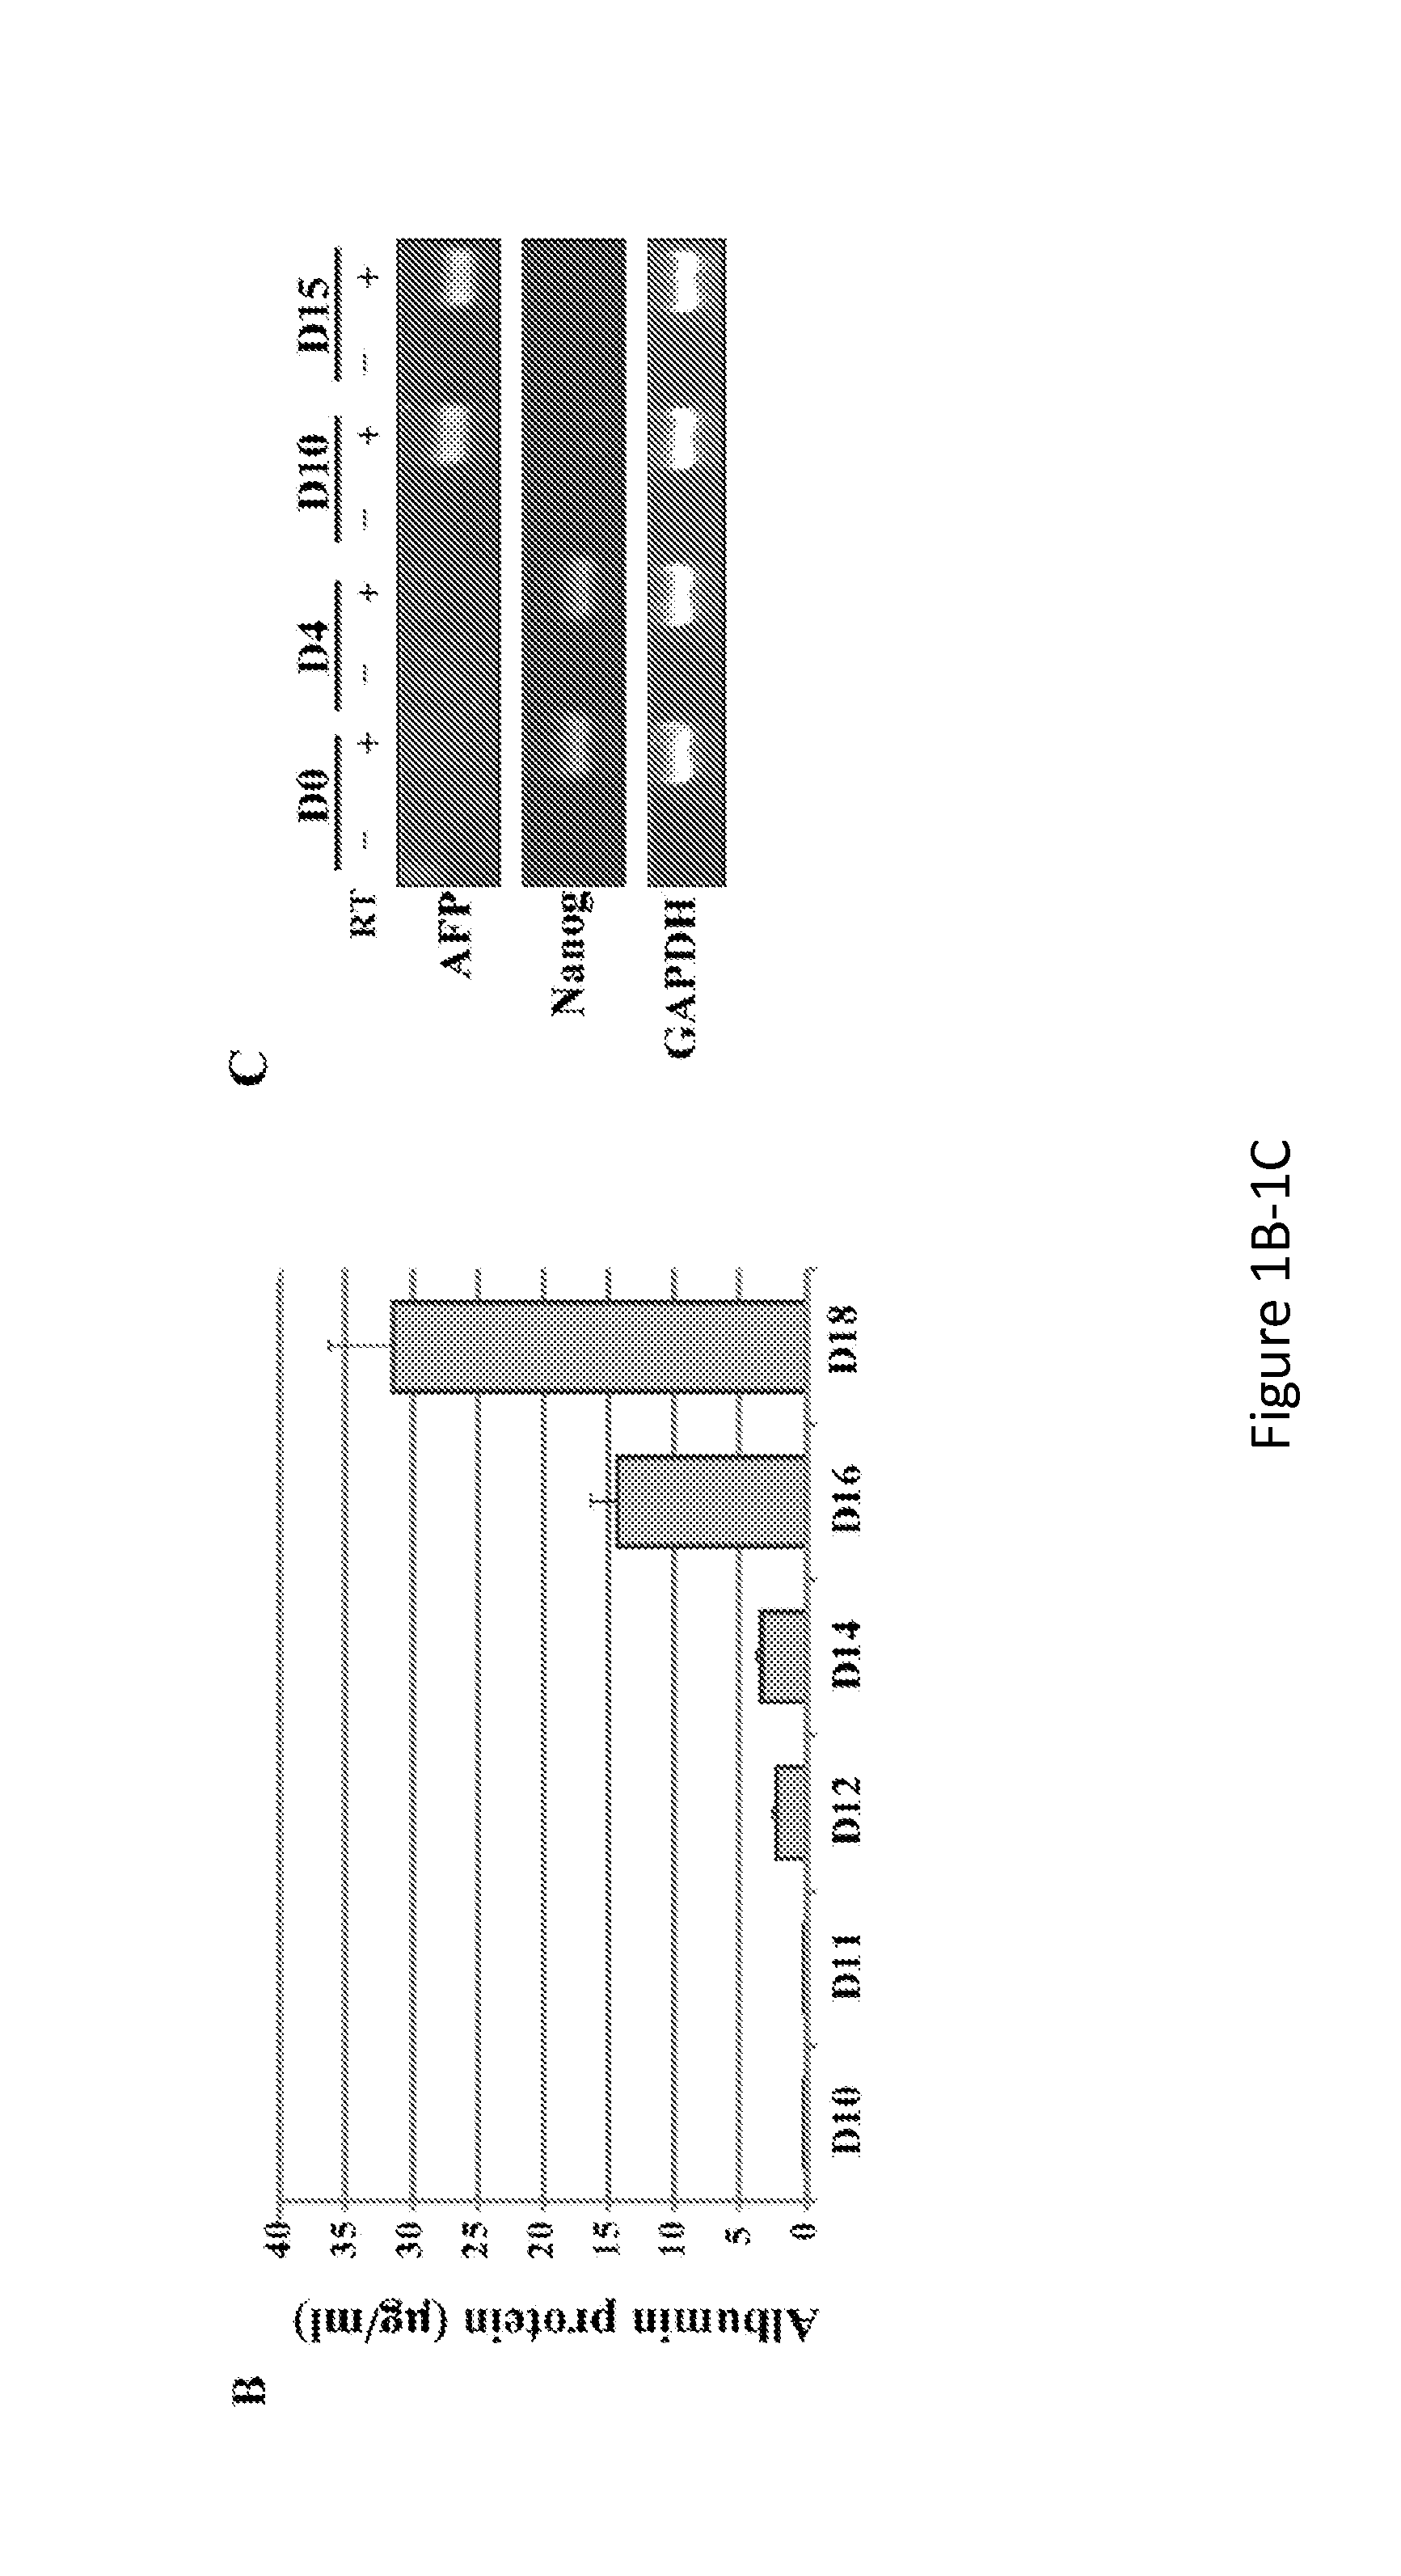 Hepatitis Virus Culture Systems Using Stem Cell-Derived Human Hepatocyte-Like Cells and Their Methods of Use